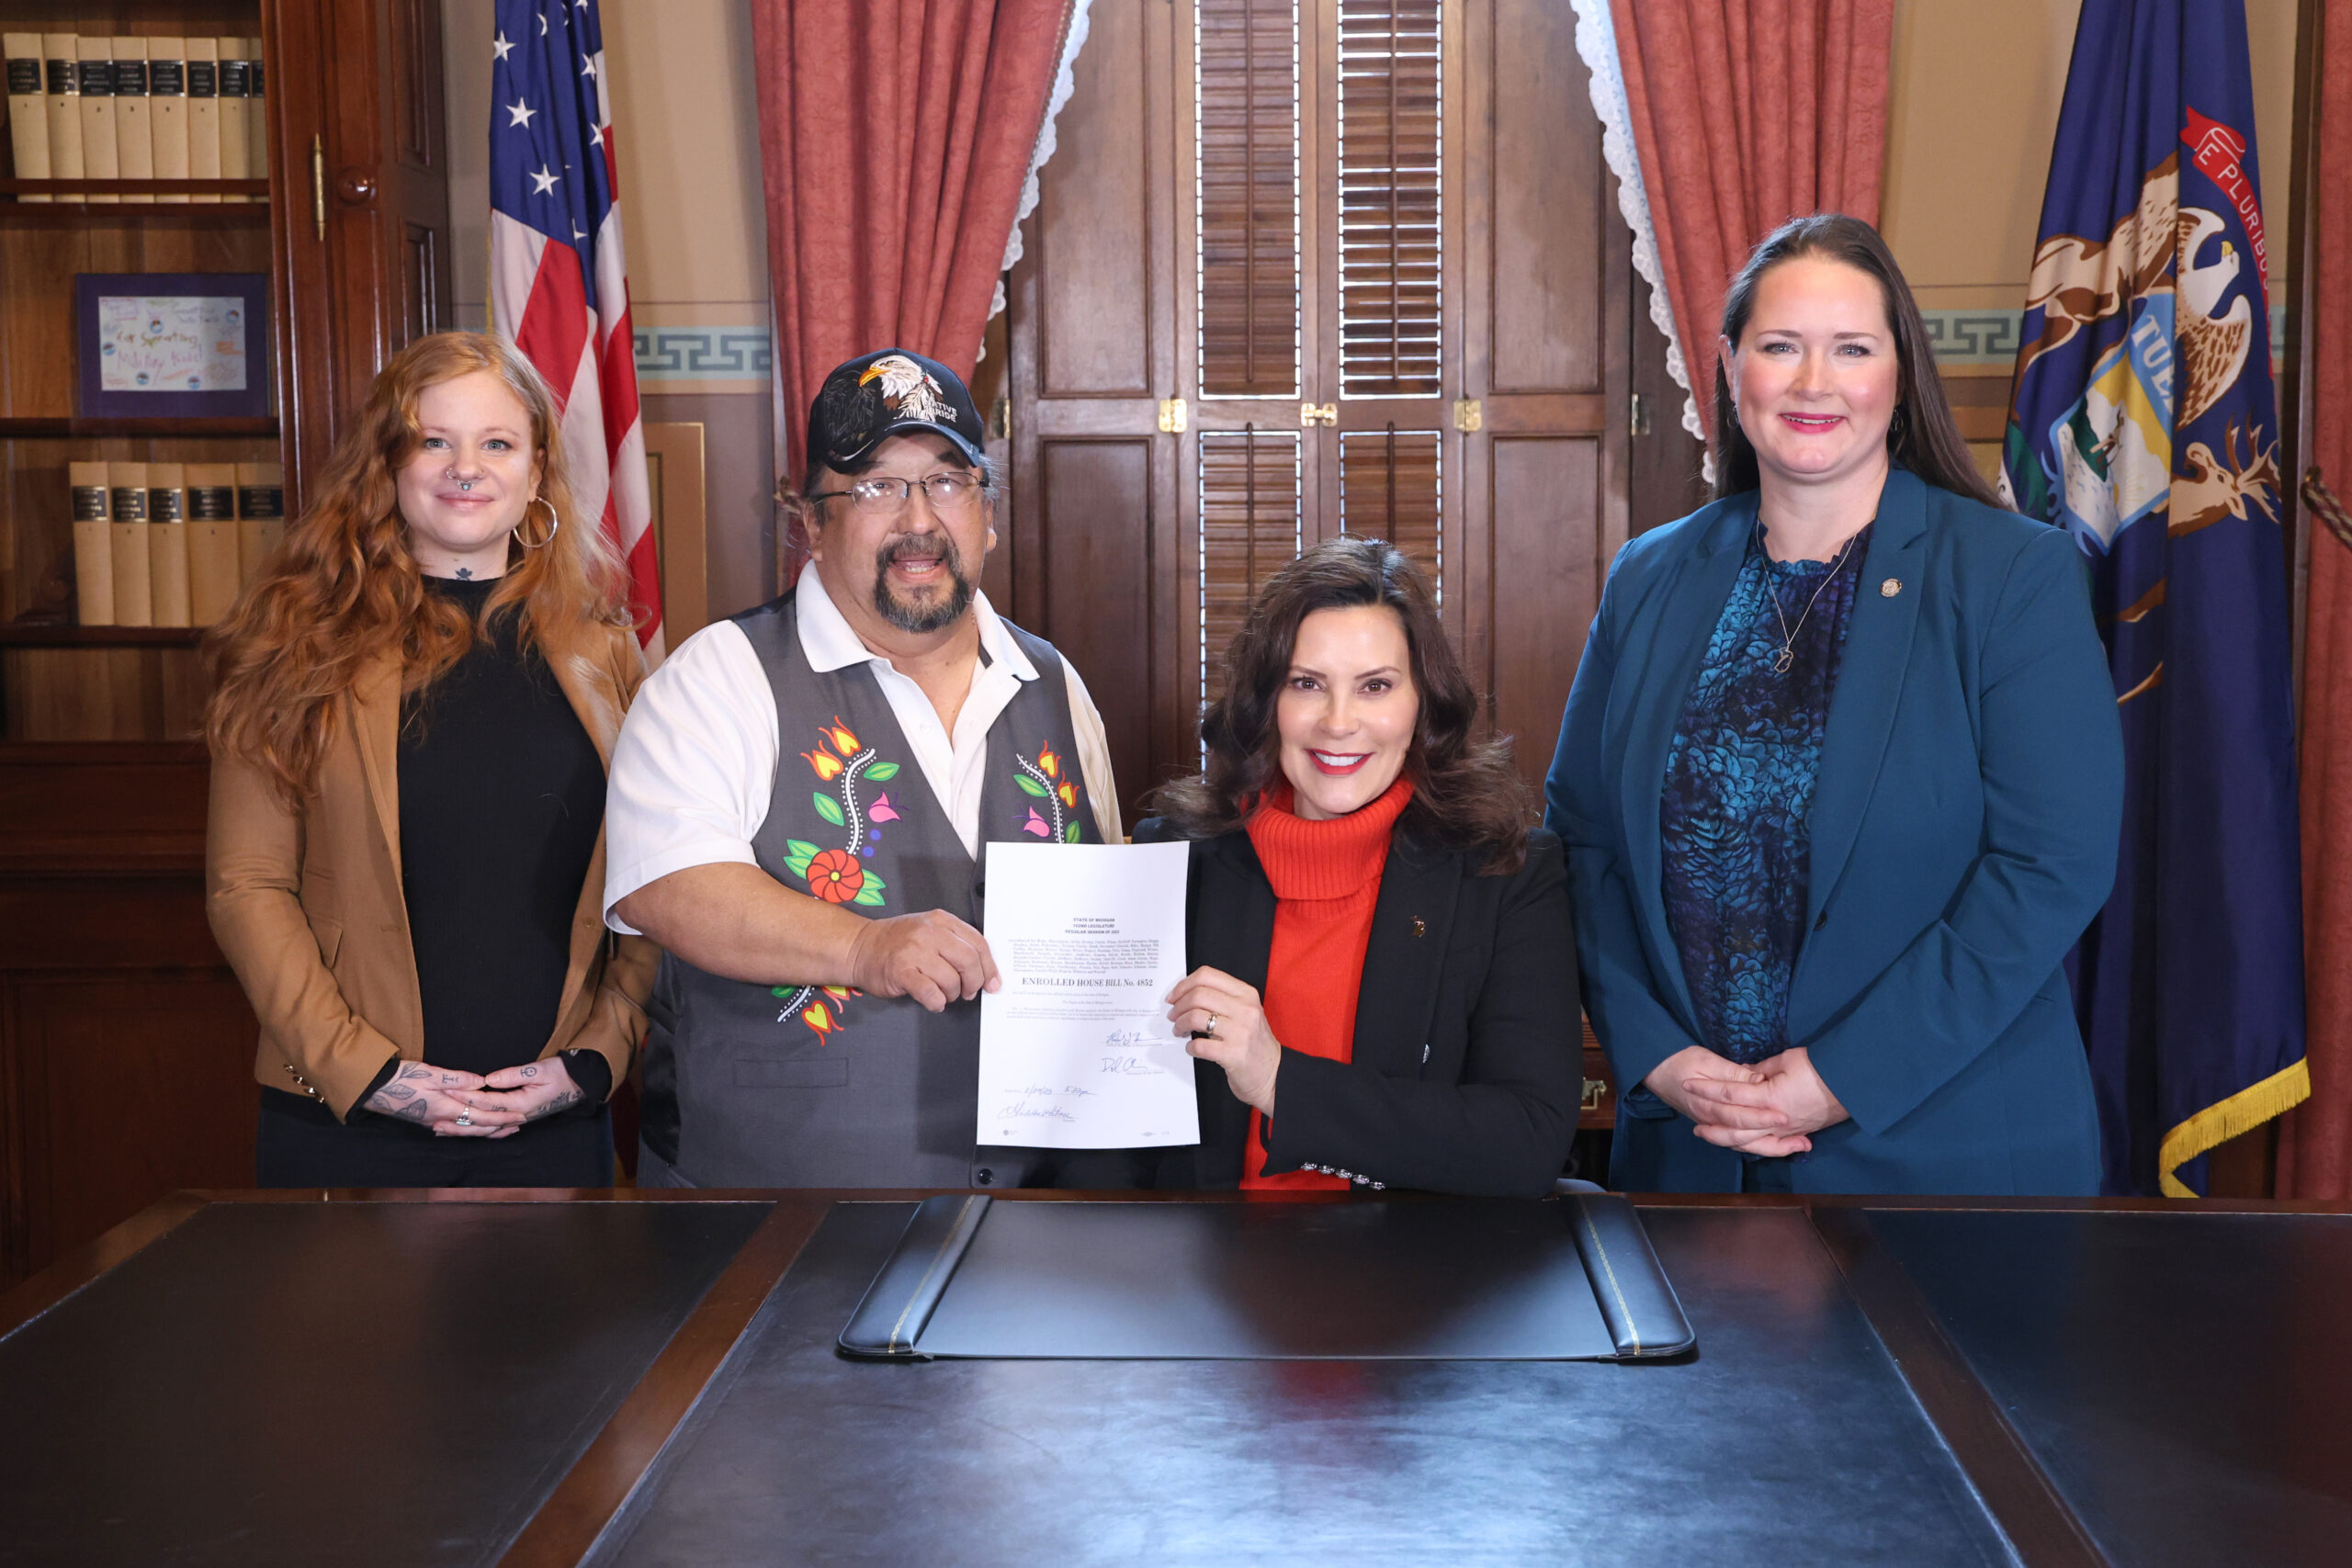 From left, Emily Paski, Gov. Whitmer’s tribal liaison; Roger LaBine, elder and rice keeper in the Lac Vieux Desert Band of Lake Superior Chippewa; Gov. Gretchen Whitmer and state Rep. Carrie Rheingans (D-Ann Arbor) pictured after the signing of House Bill 4852 at the Capitol in Lansing on Dec. 5, 2023.